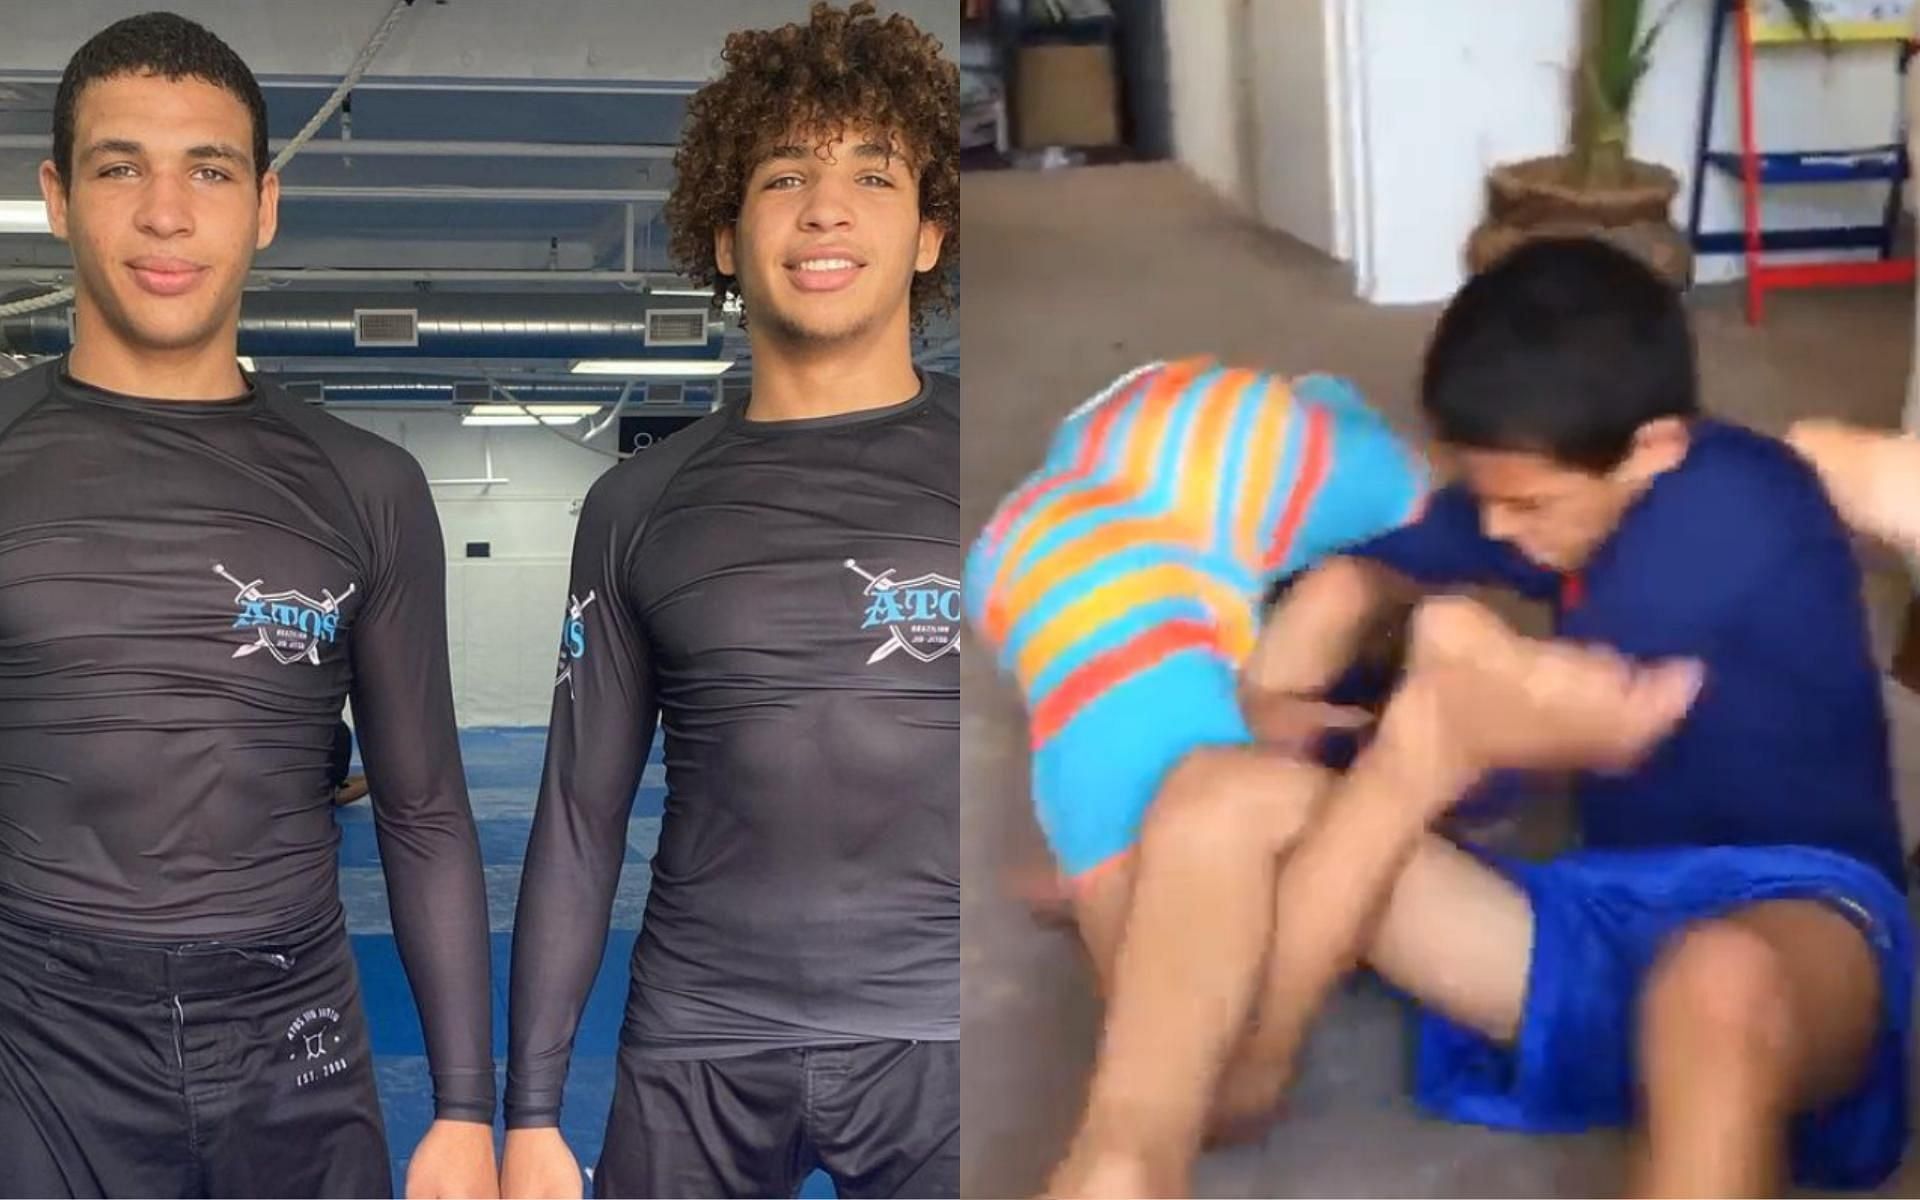 Tye and Kade Ruotolo (left) shared a throwback video of when they were just kids grappling (right). (Images courtesy of ONE Championship)